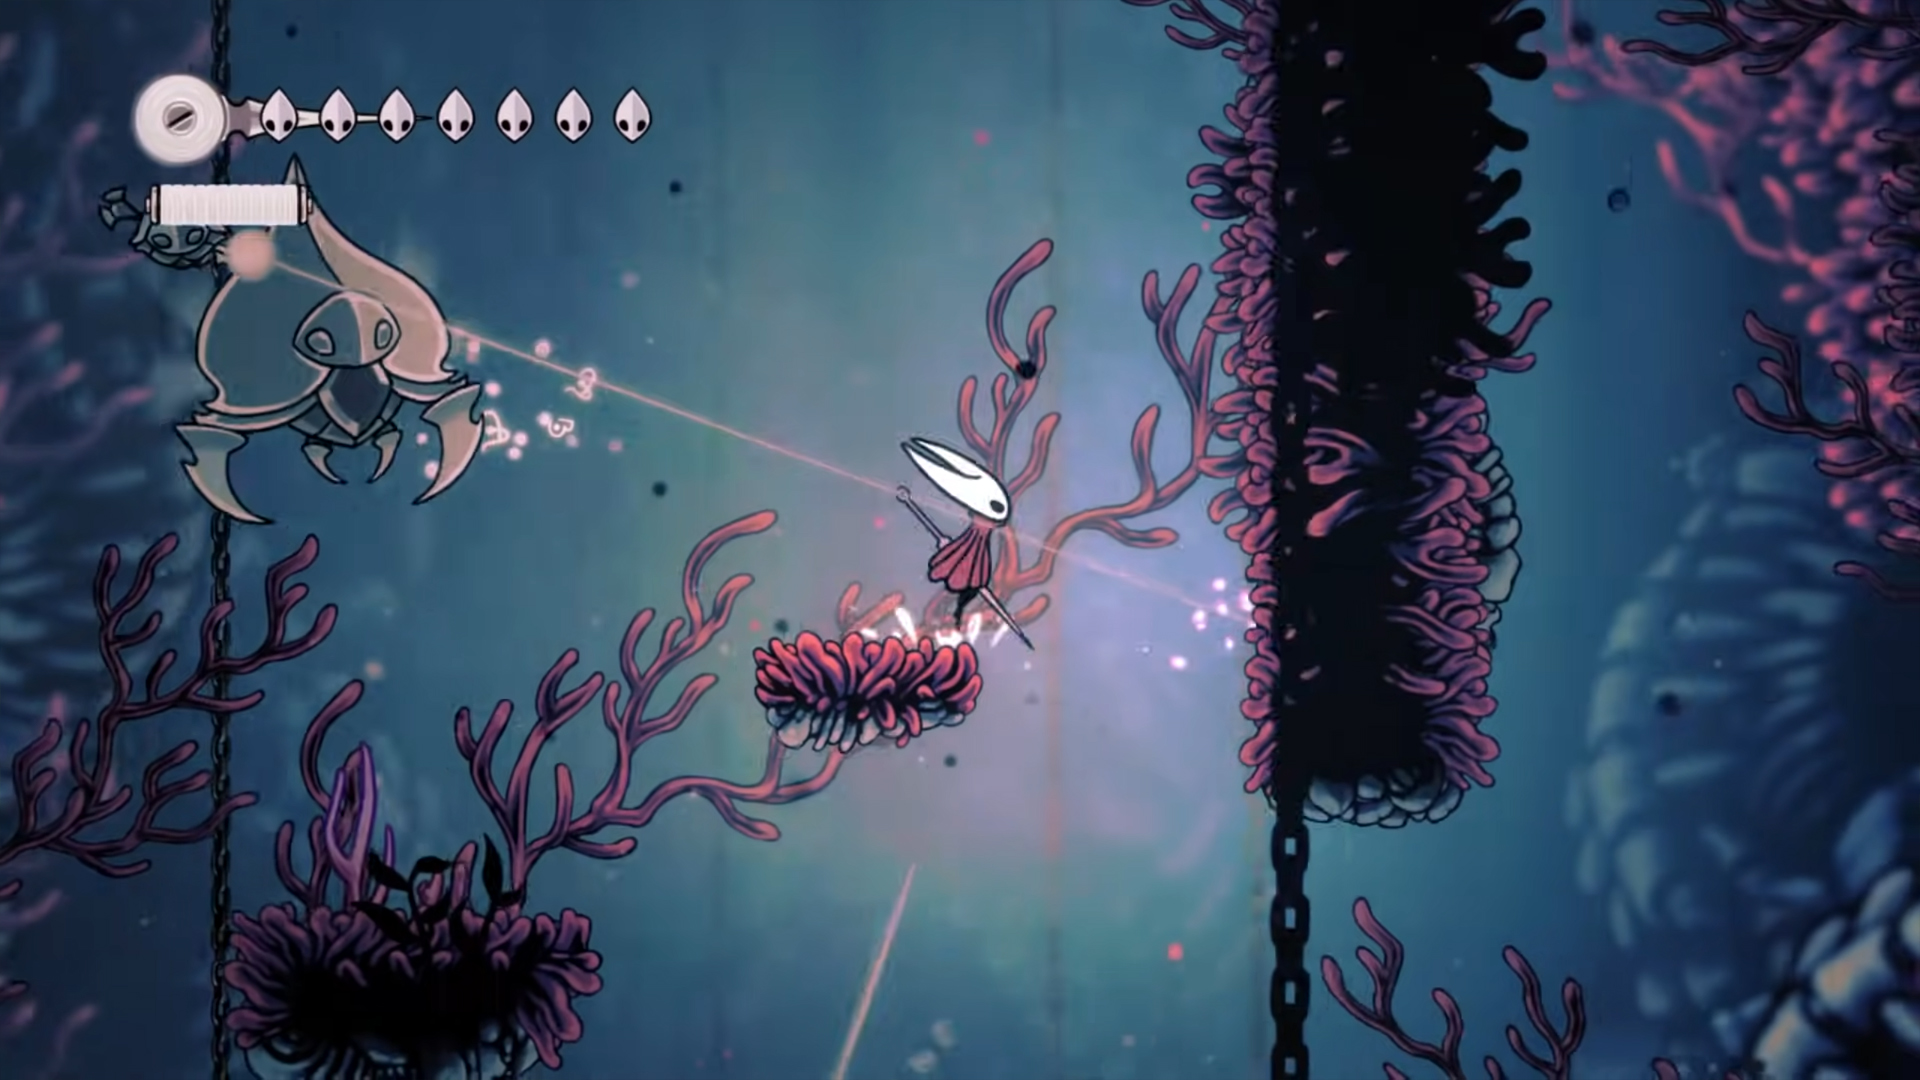 Hollow Knight: Silksong has been officially delayed - Meristation